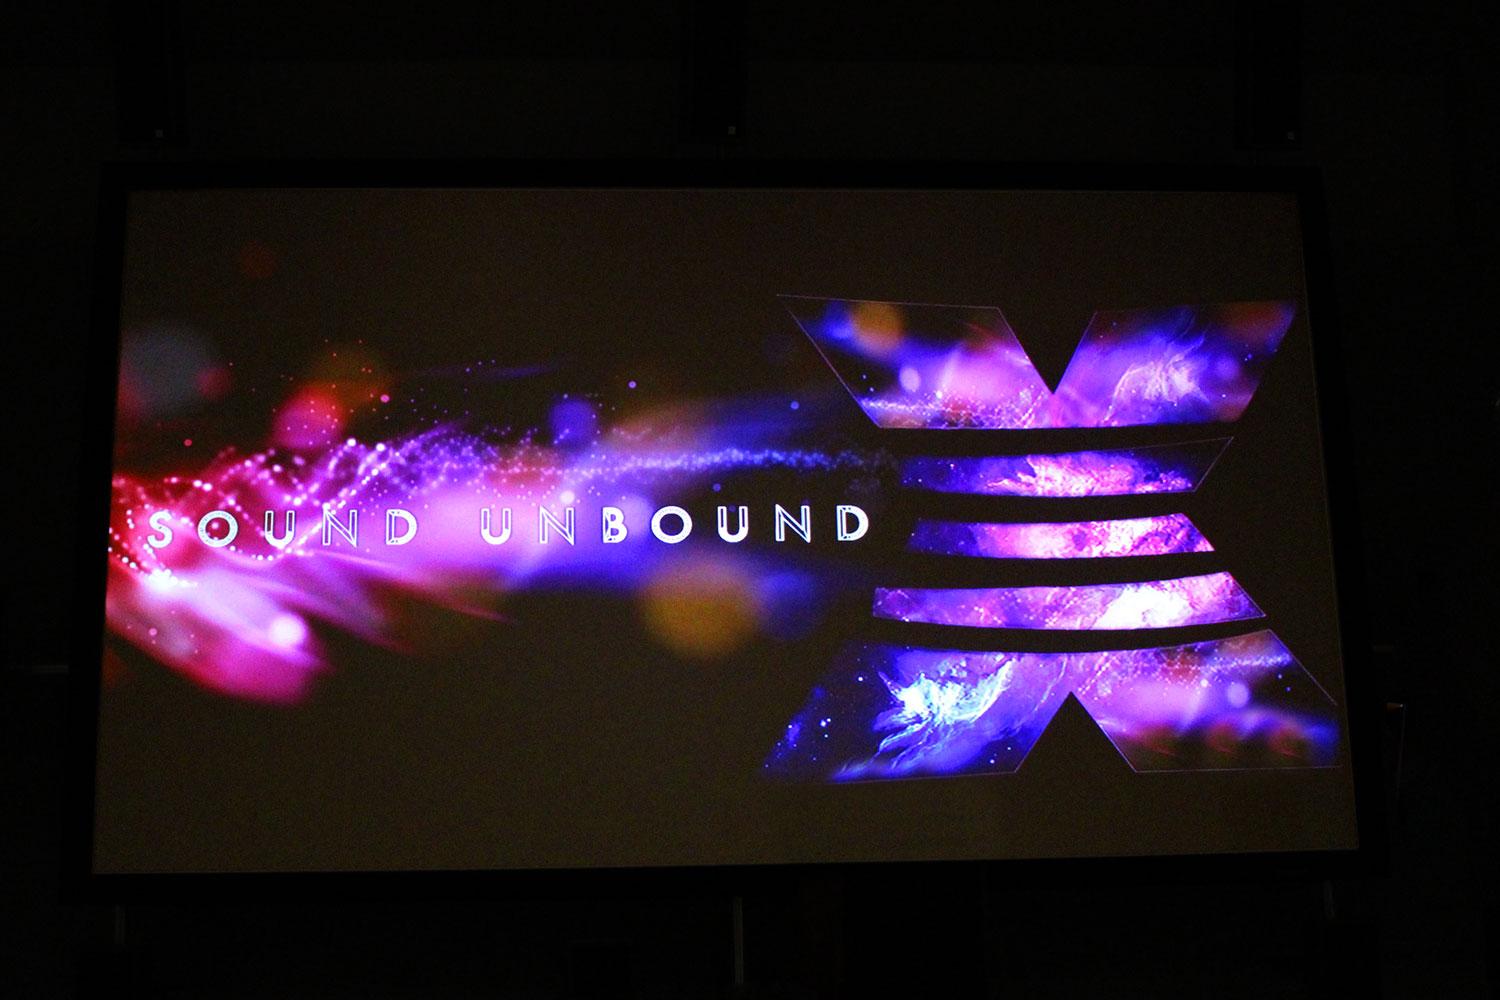 Ultimate surround sound guide: DTS, Dolby Atmos, and more explained